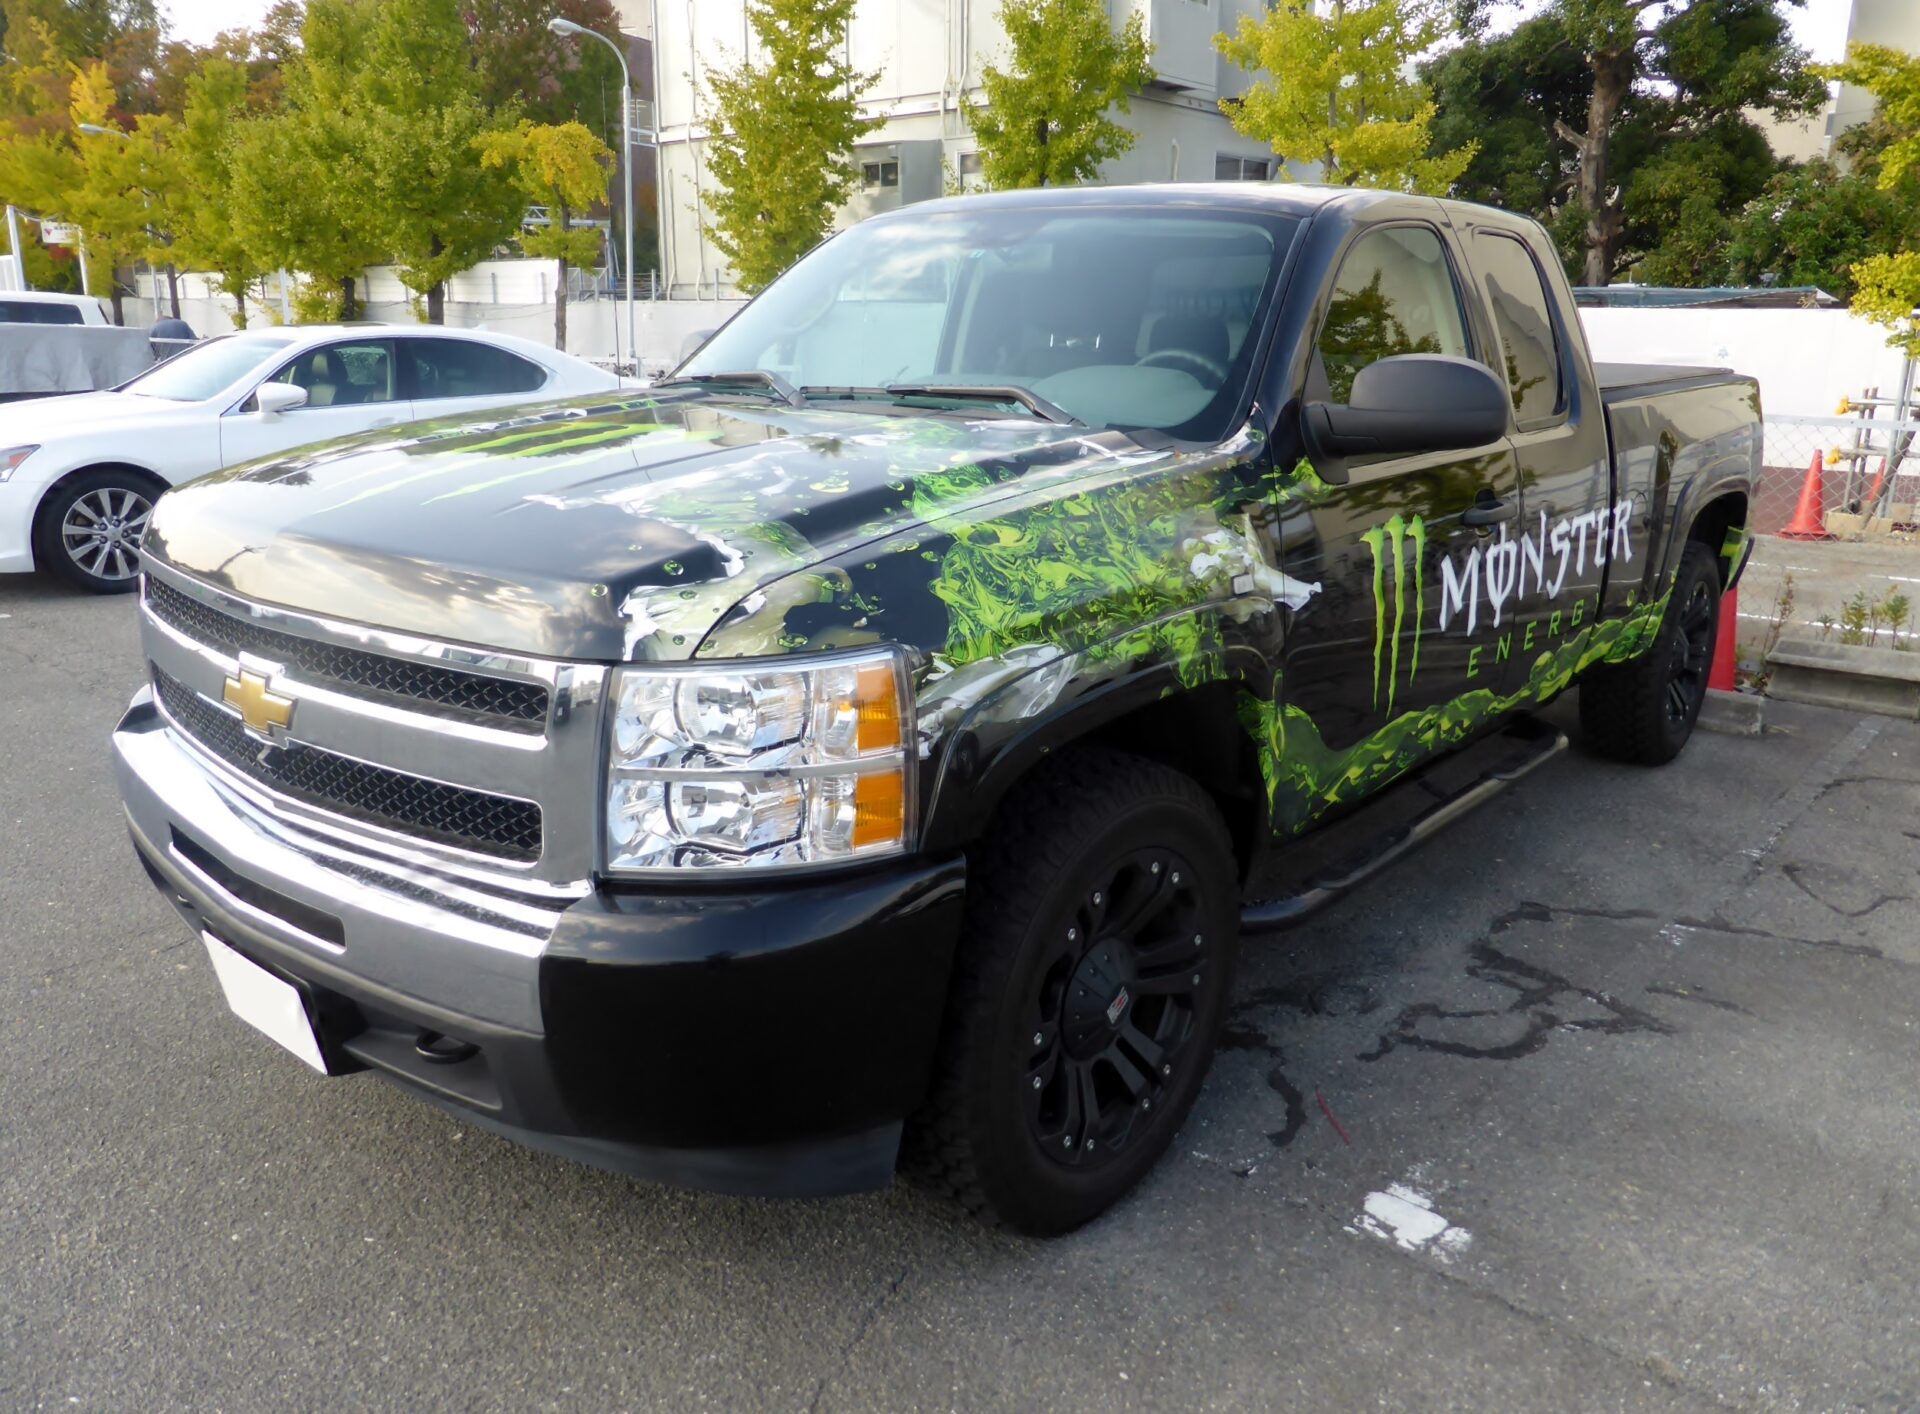 How long does a wrap last on a truck?